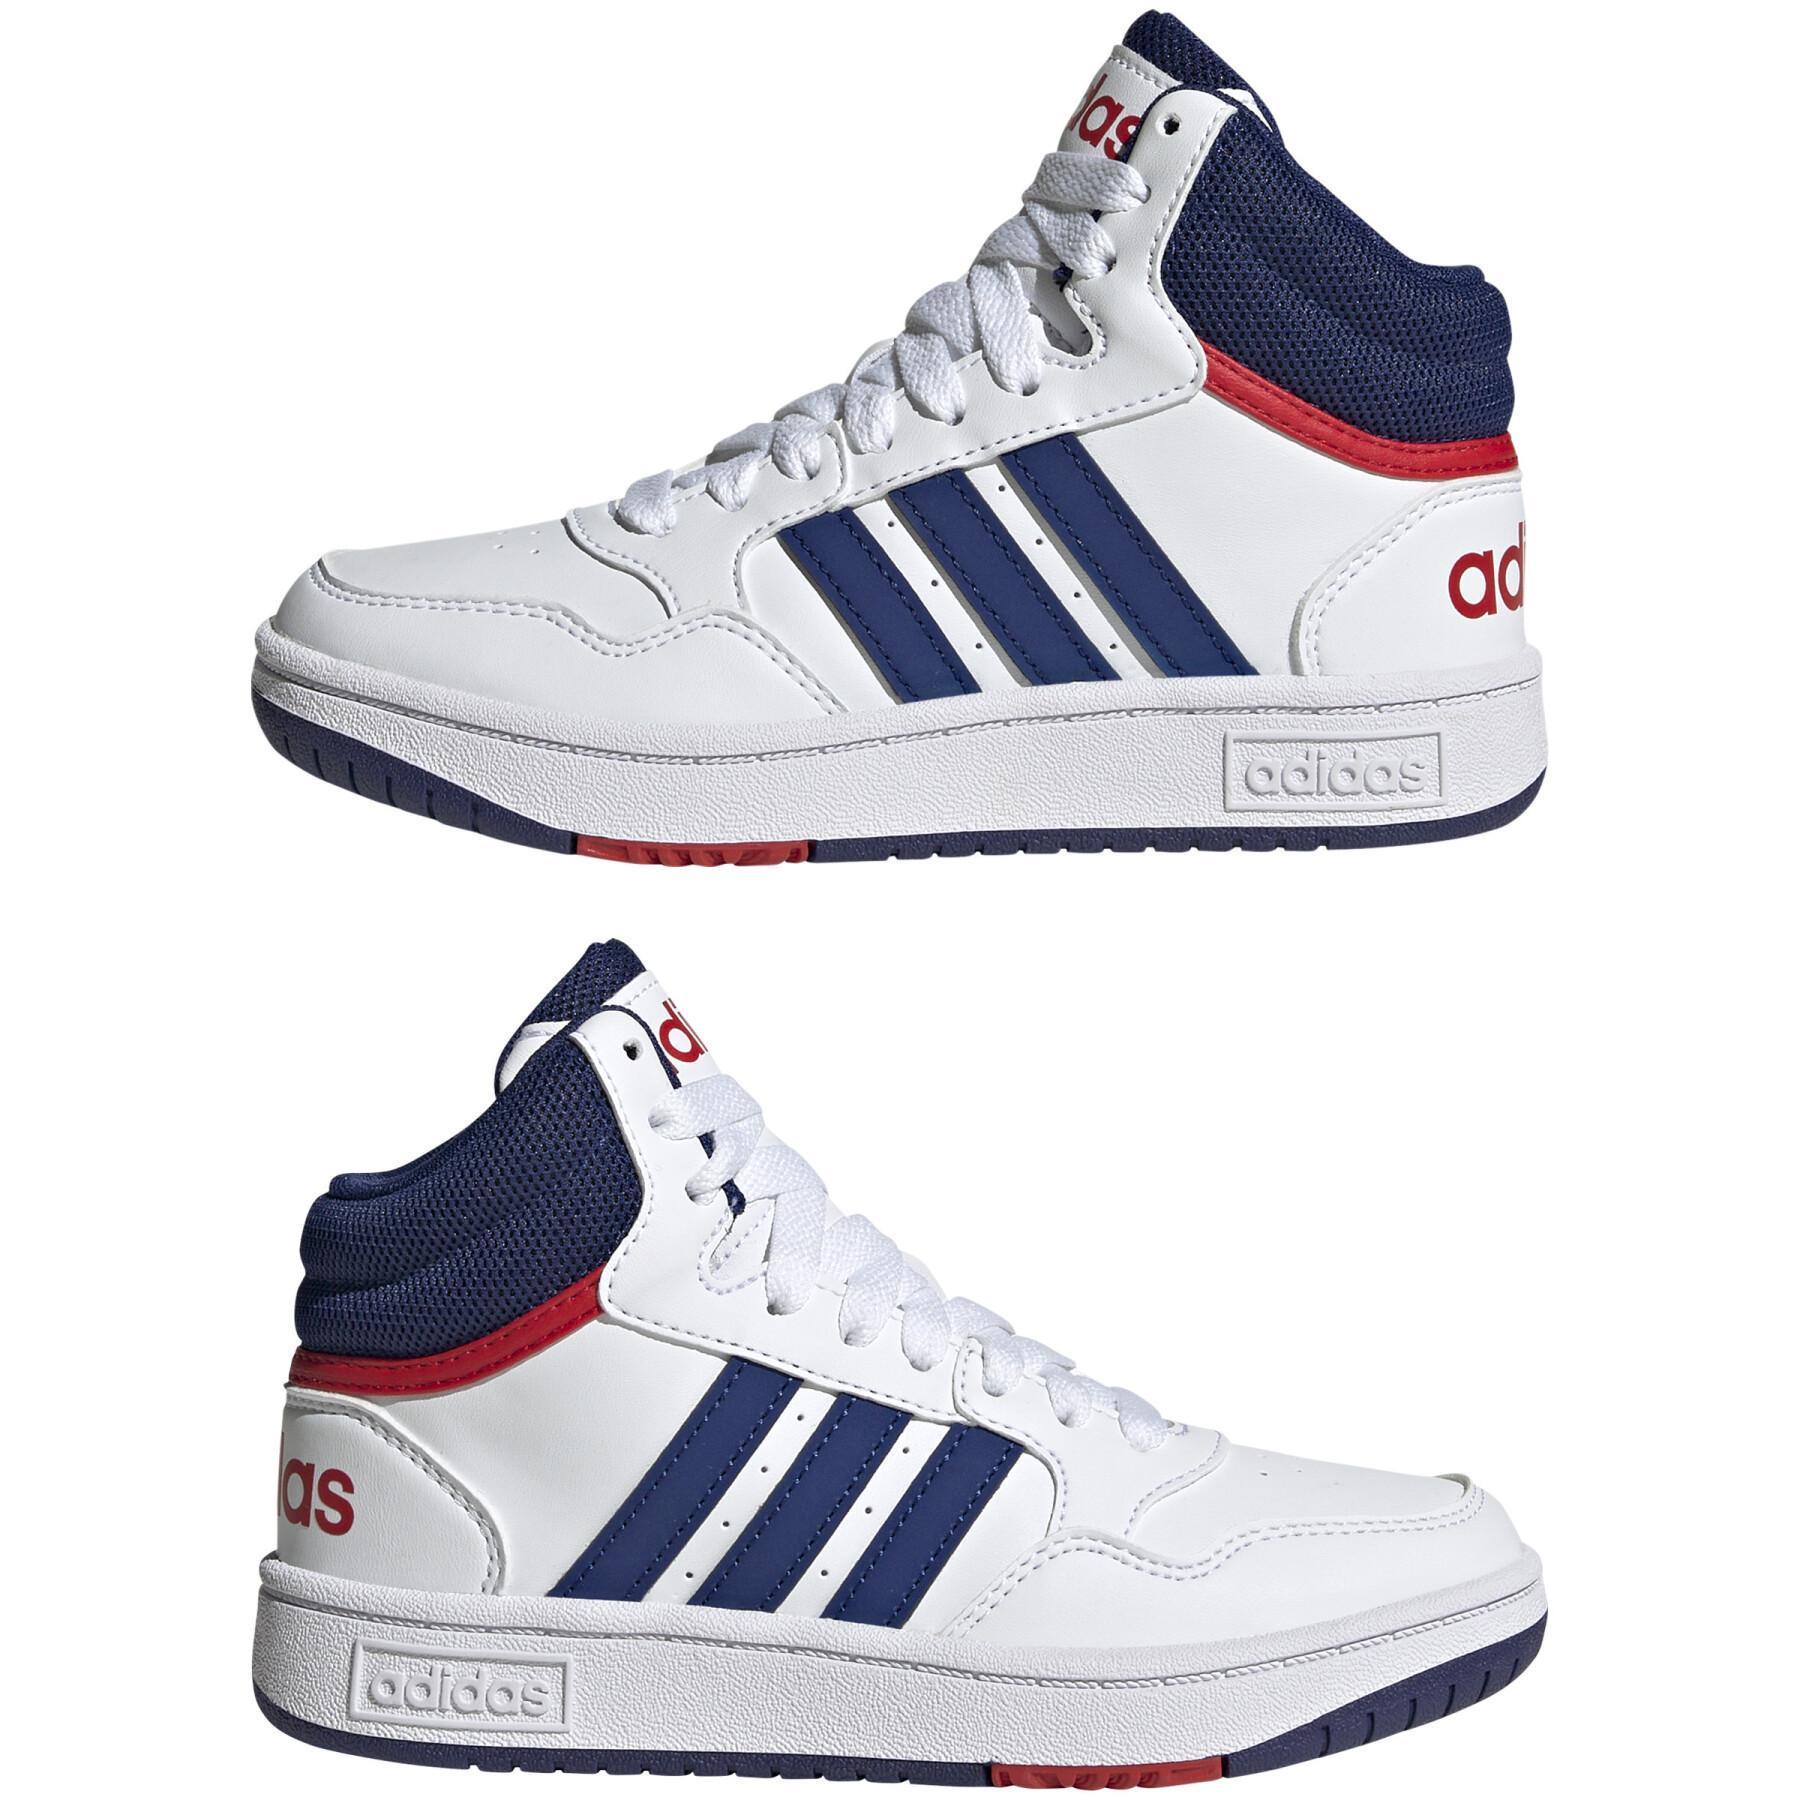 Child mid sneakers adidas Hoops